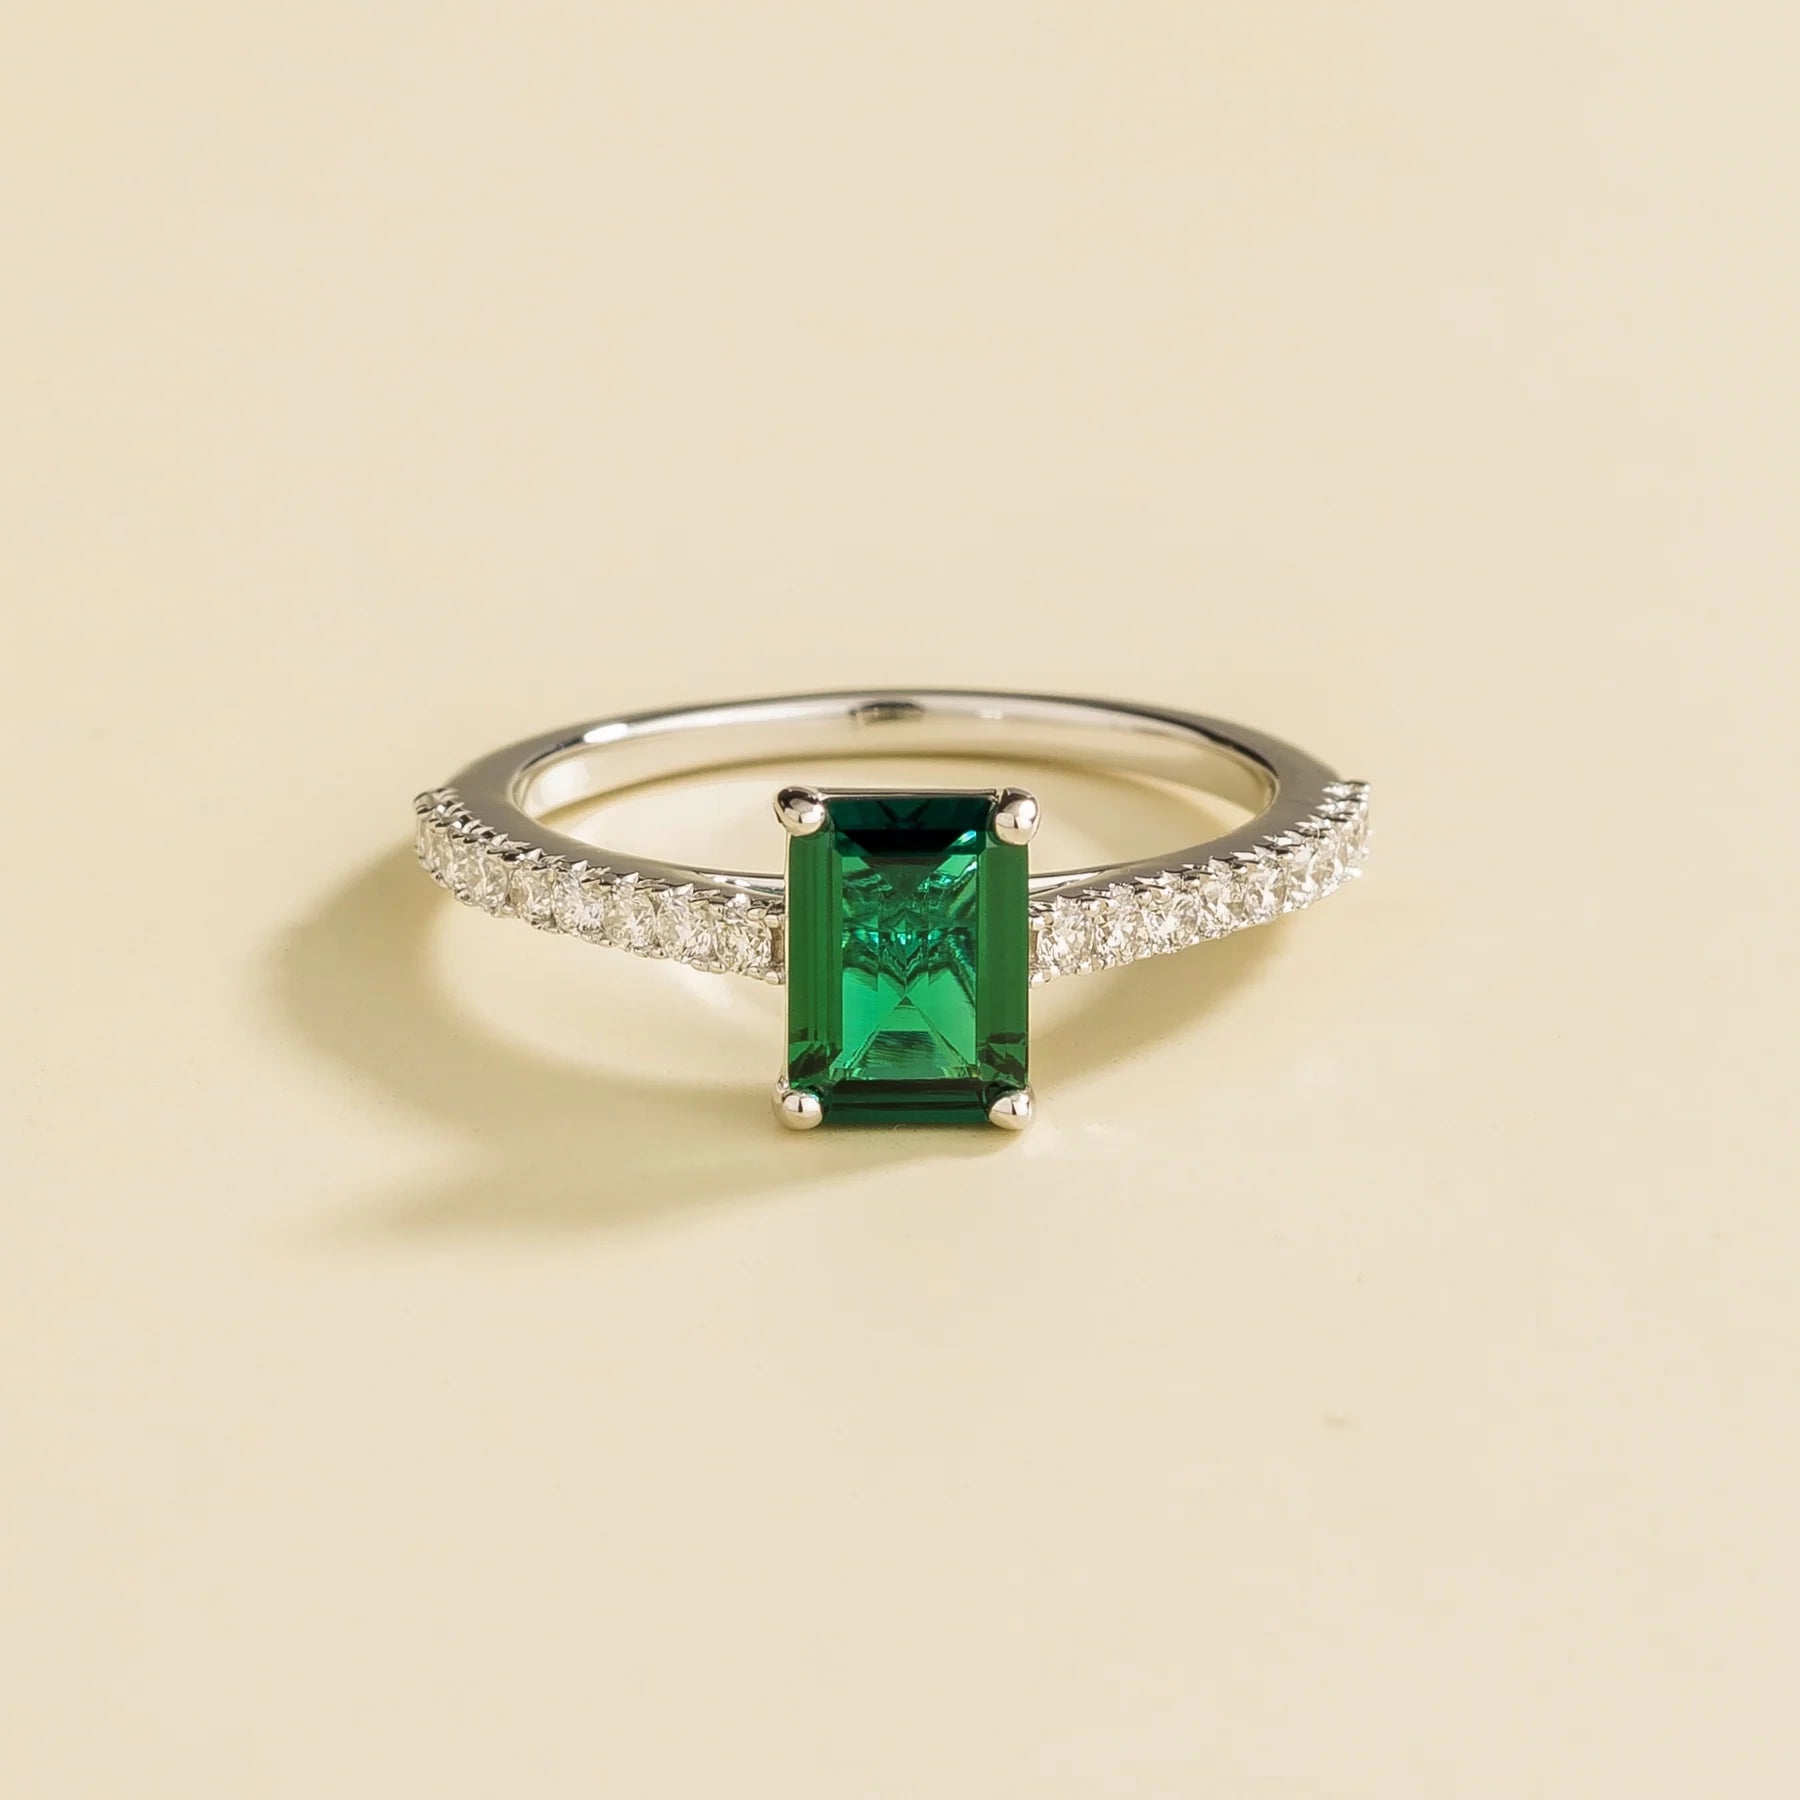 Thamani White Gold Ring With Emerald and Diamond By Juvetti Online Jewellery London